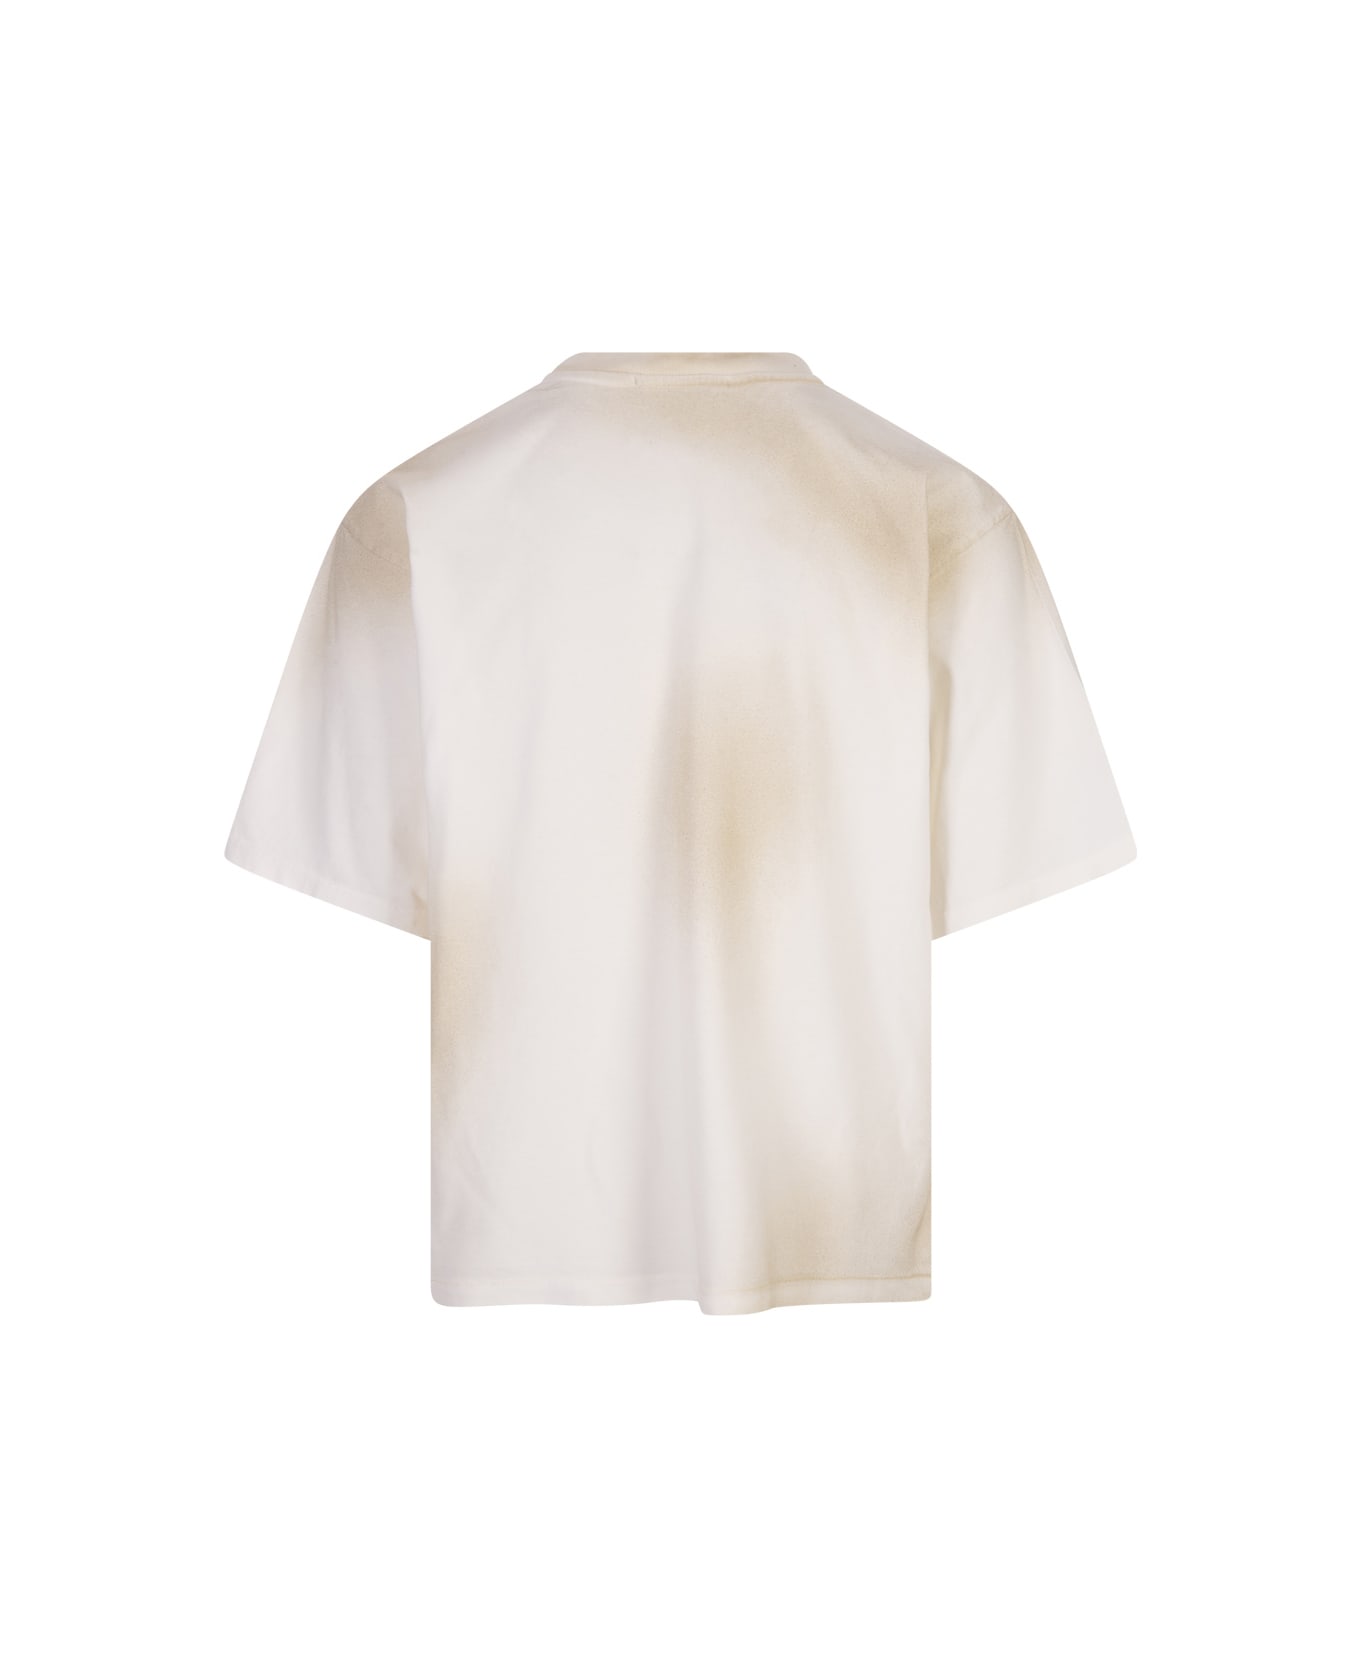 A Paper Kid White T-shirt With Washed Effect And Overlapped Prints - White